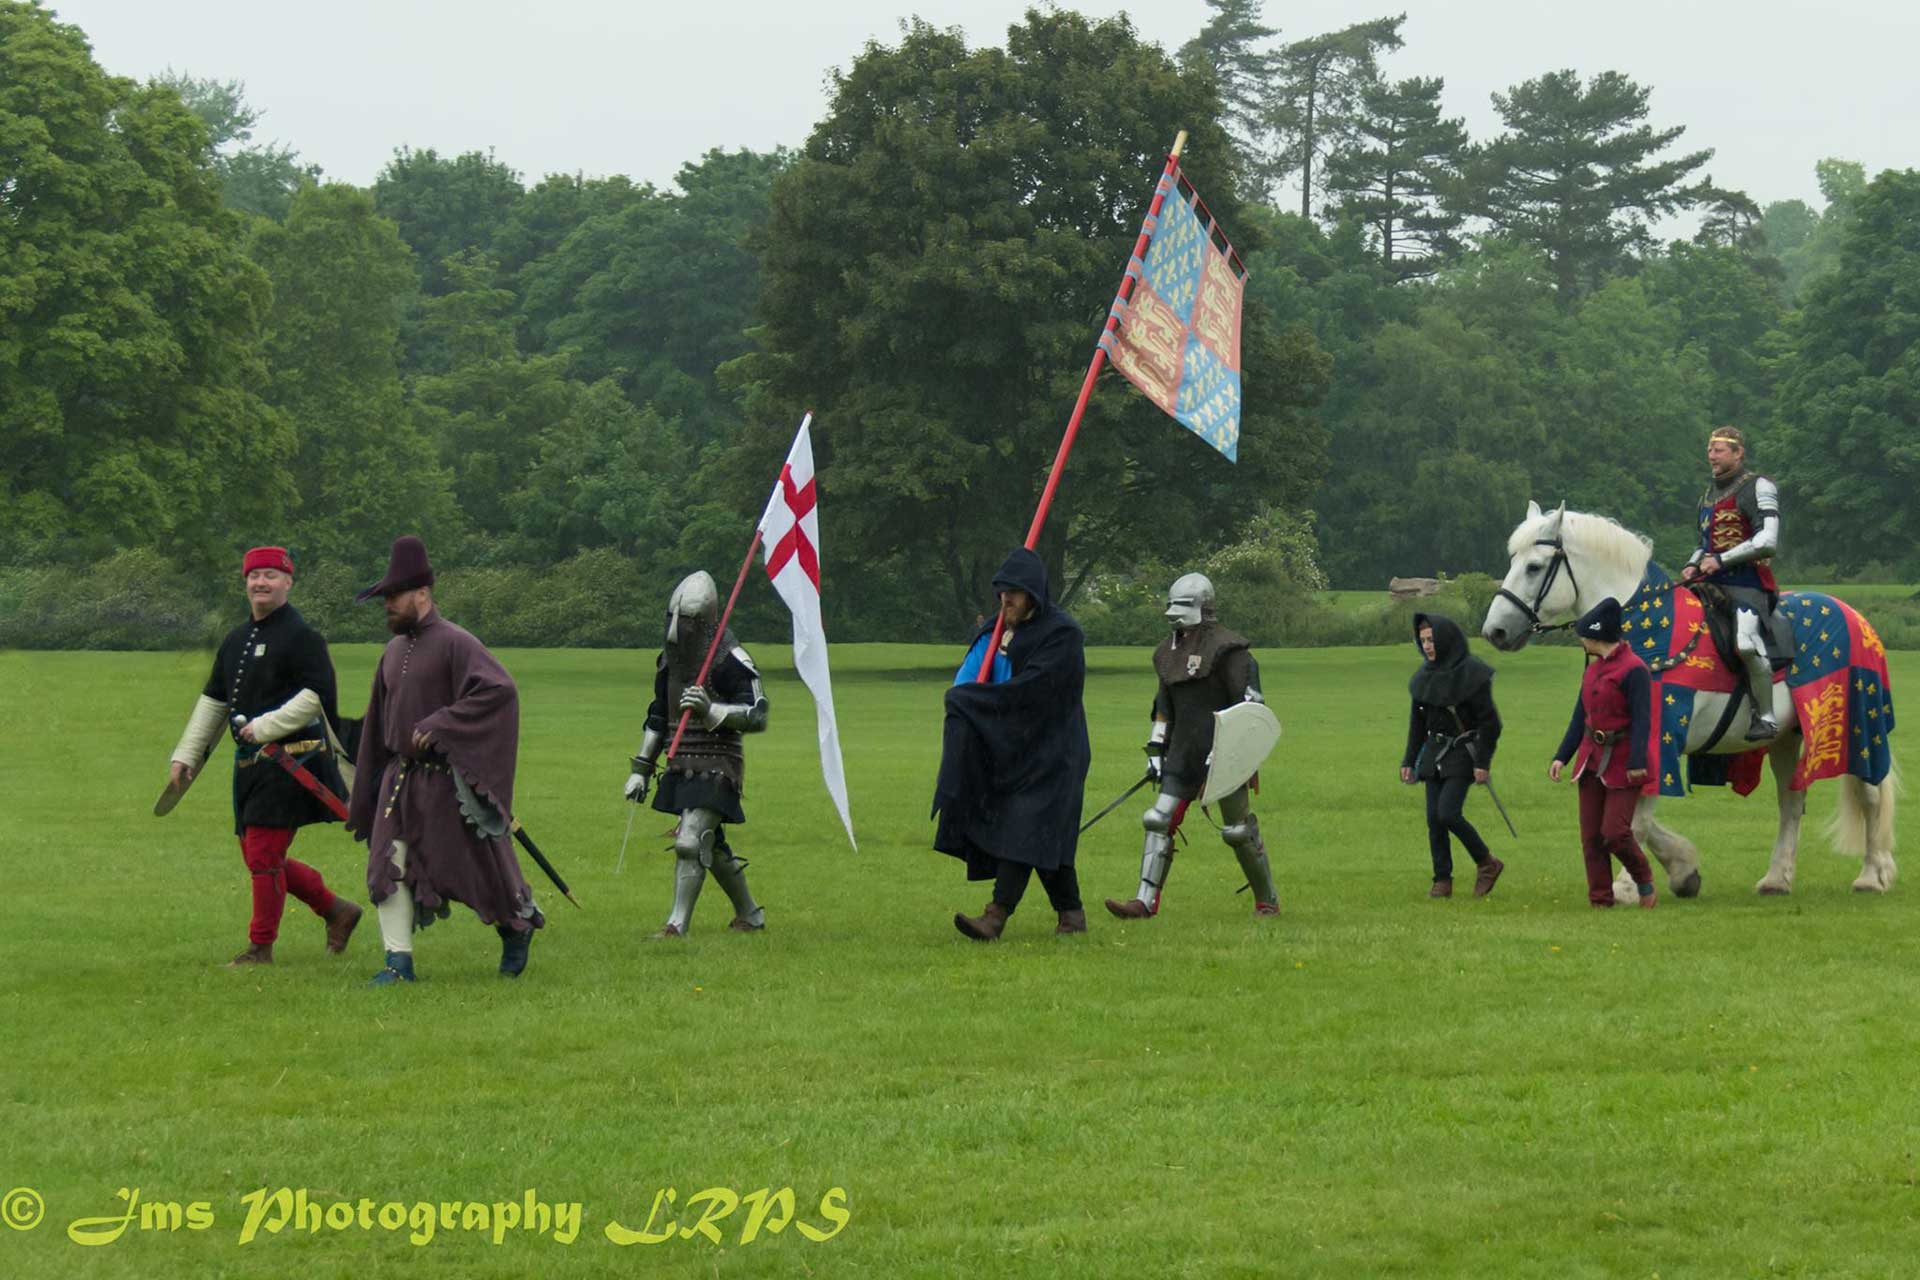 Plantagenet Medieval Society at the Plantagenet Re-enactment Weekend in Cirencester